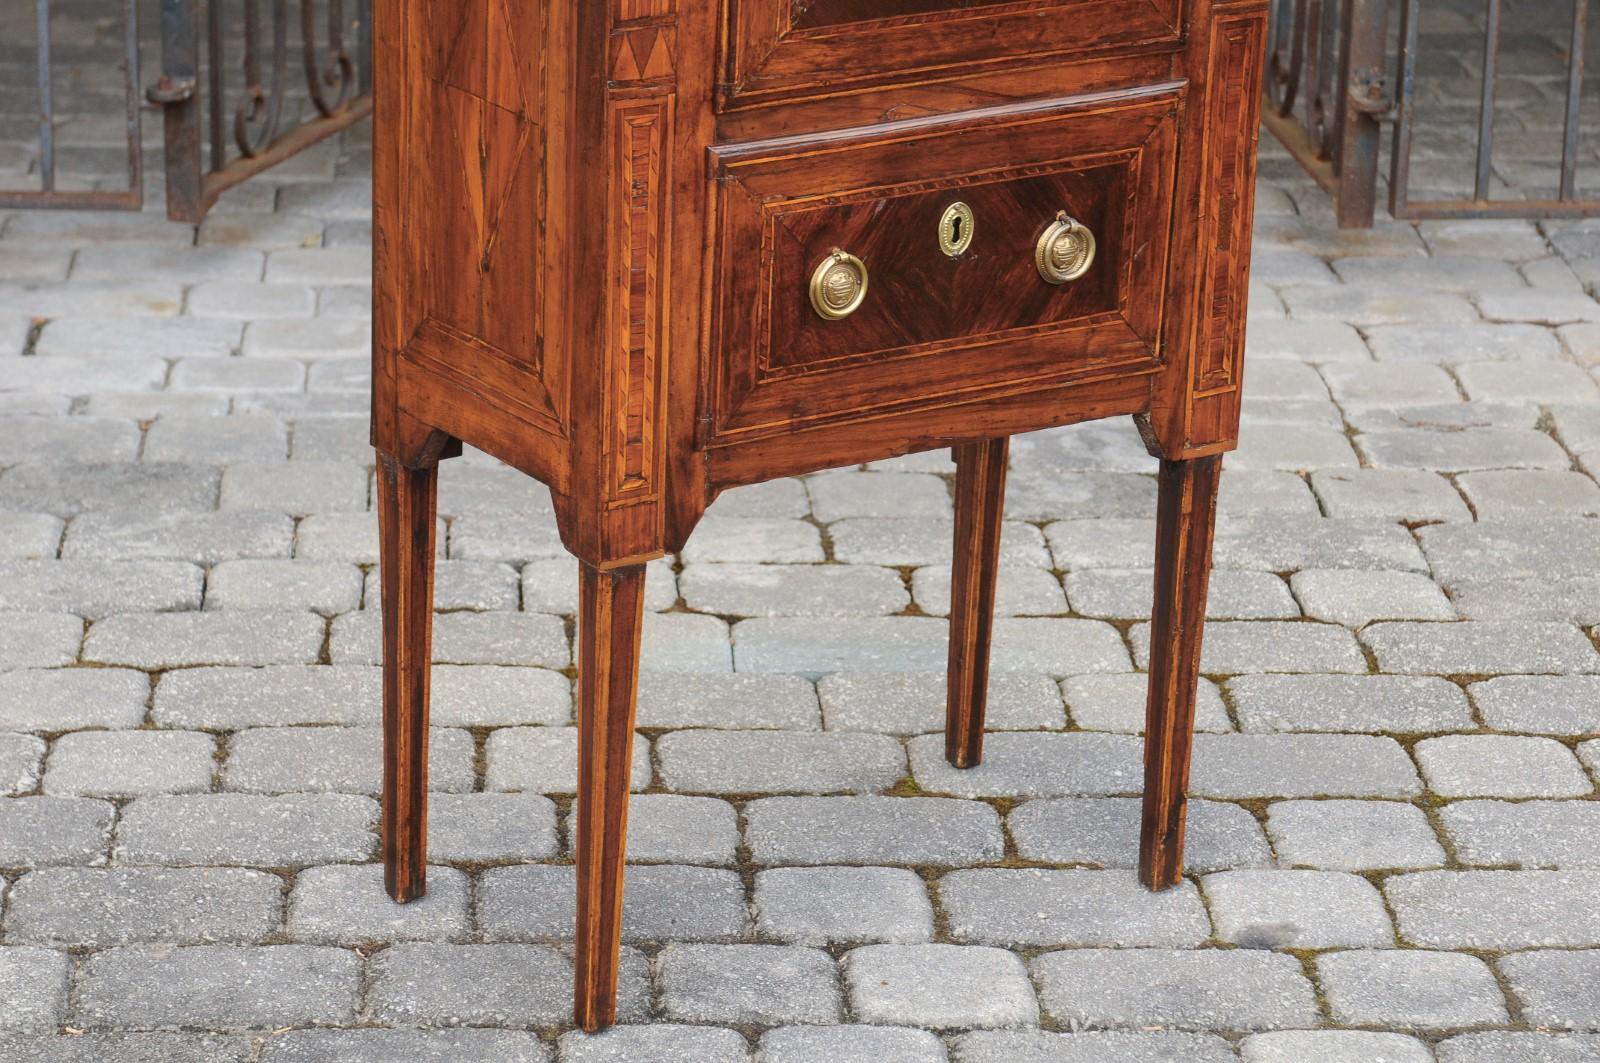 A petite Italian neoclassical period walnut commode from the early 19th century, with inlaid motifs and two drawers. Born in Italy during the early years of the 19th century, this exquisite Italian commode features a rectangular top adorned with an